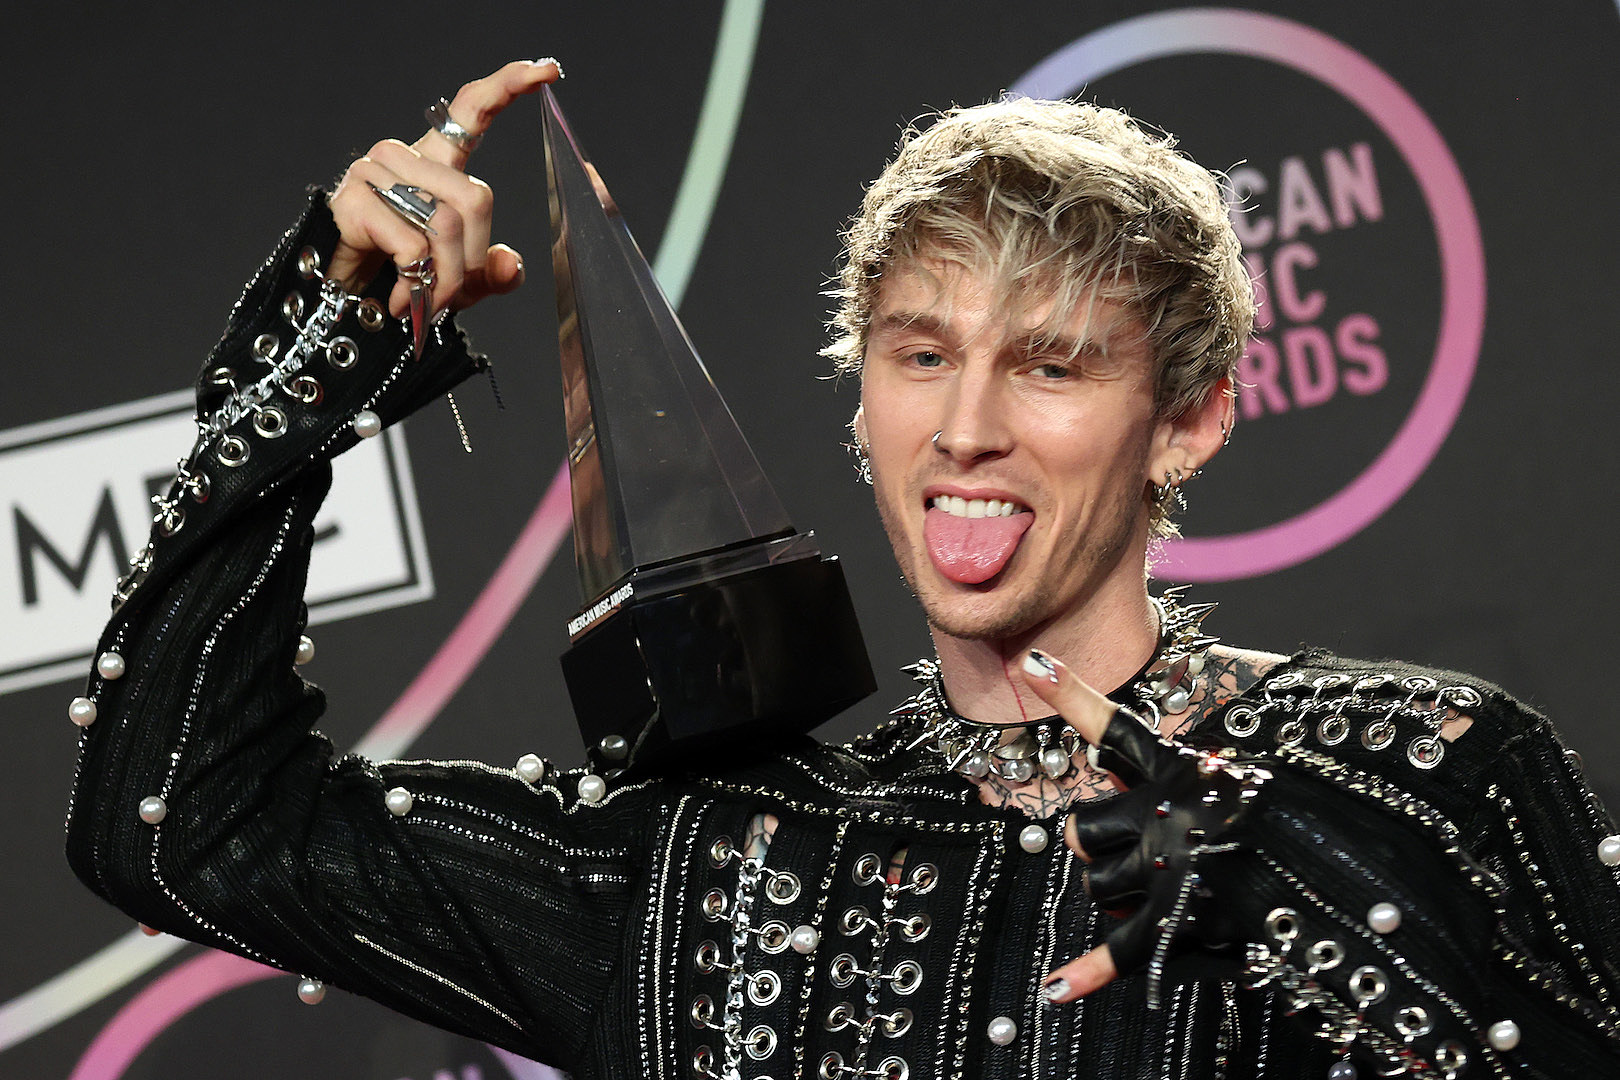 MGK Wins ‘Fav Rock Artist’ at AMAs, Says Age of Rock Star ‘Alive’